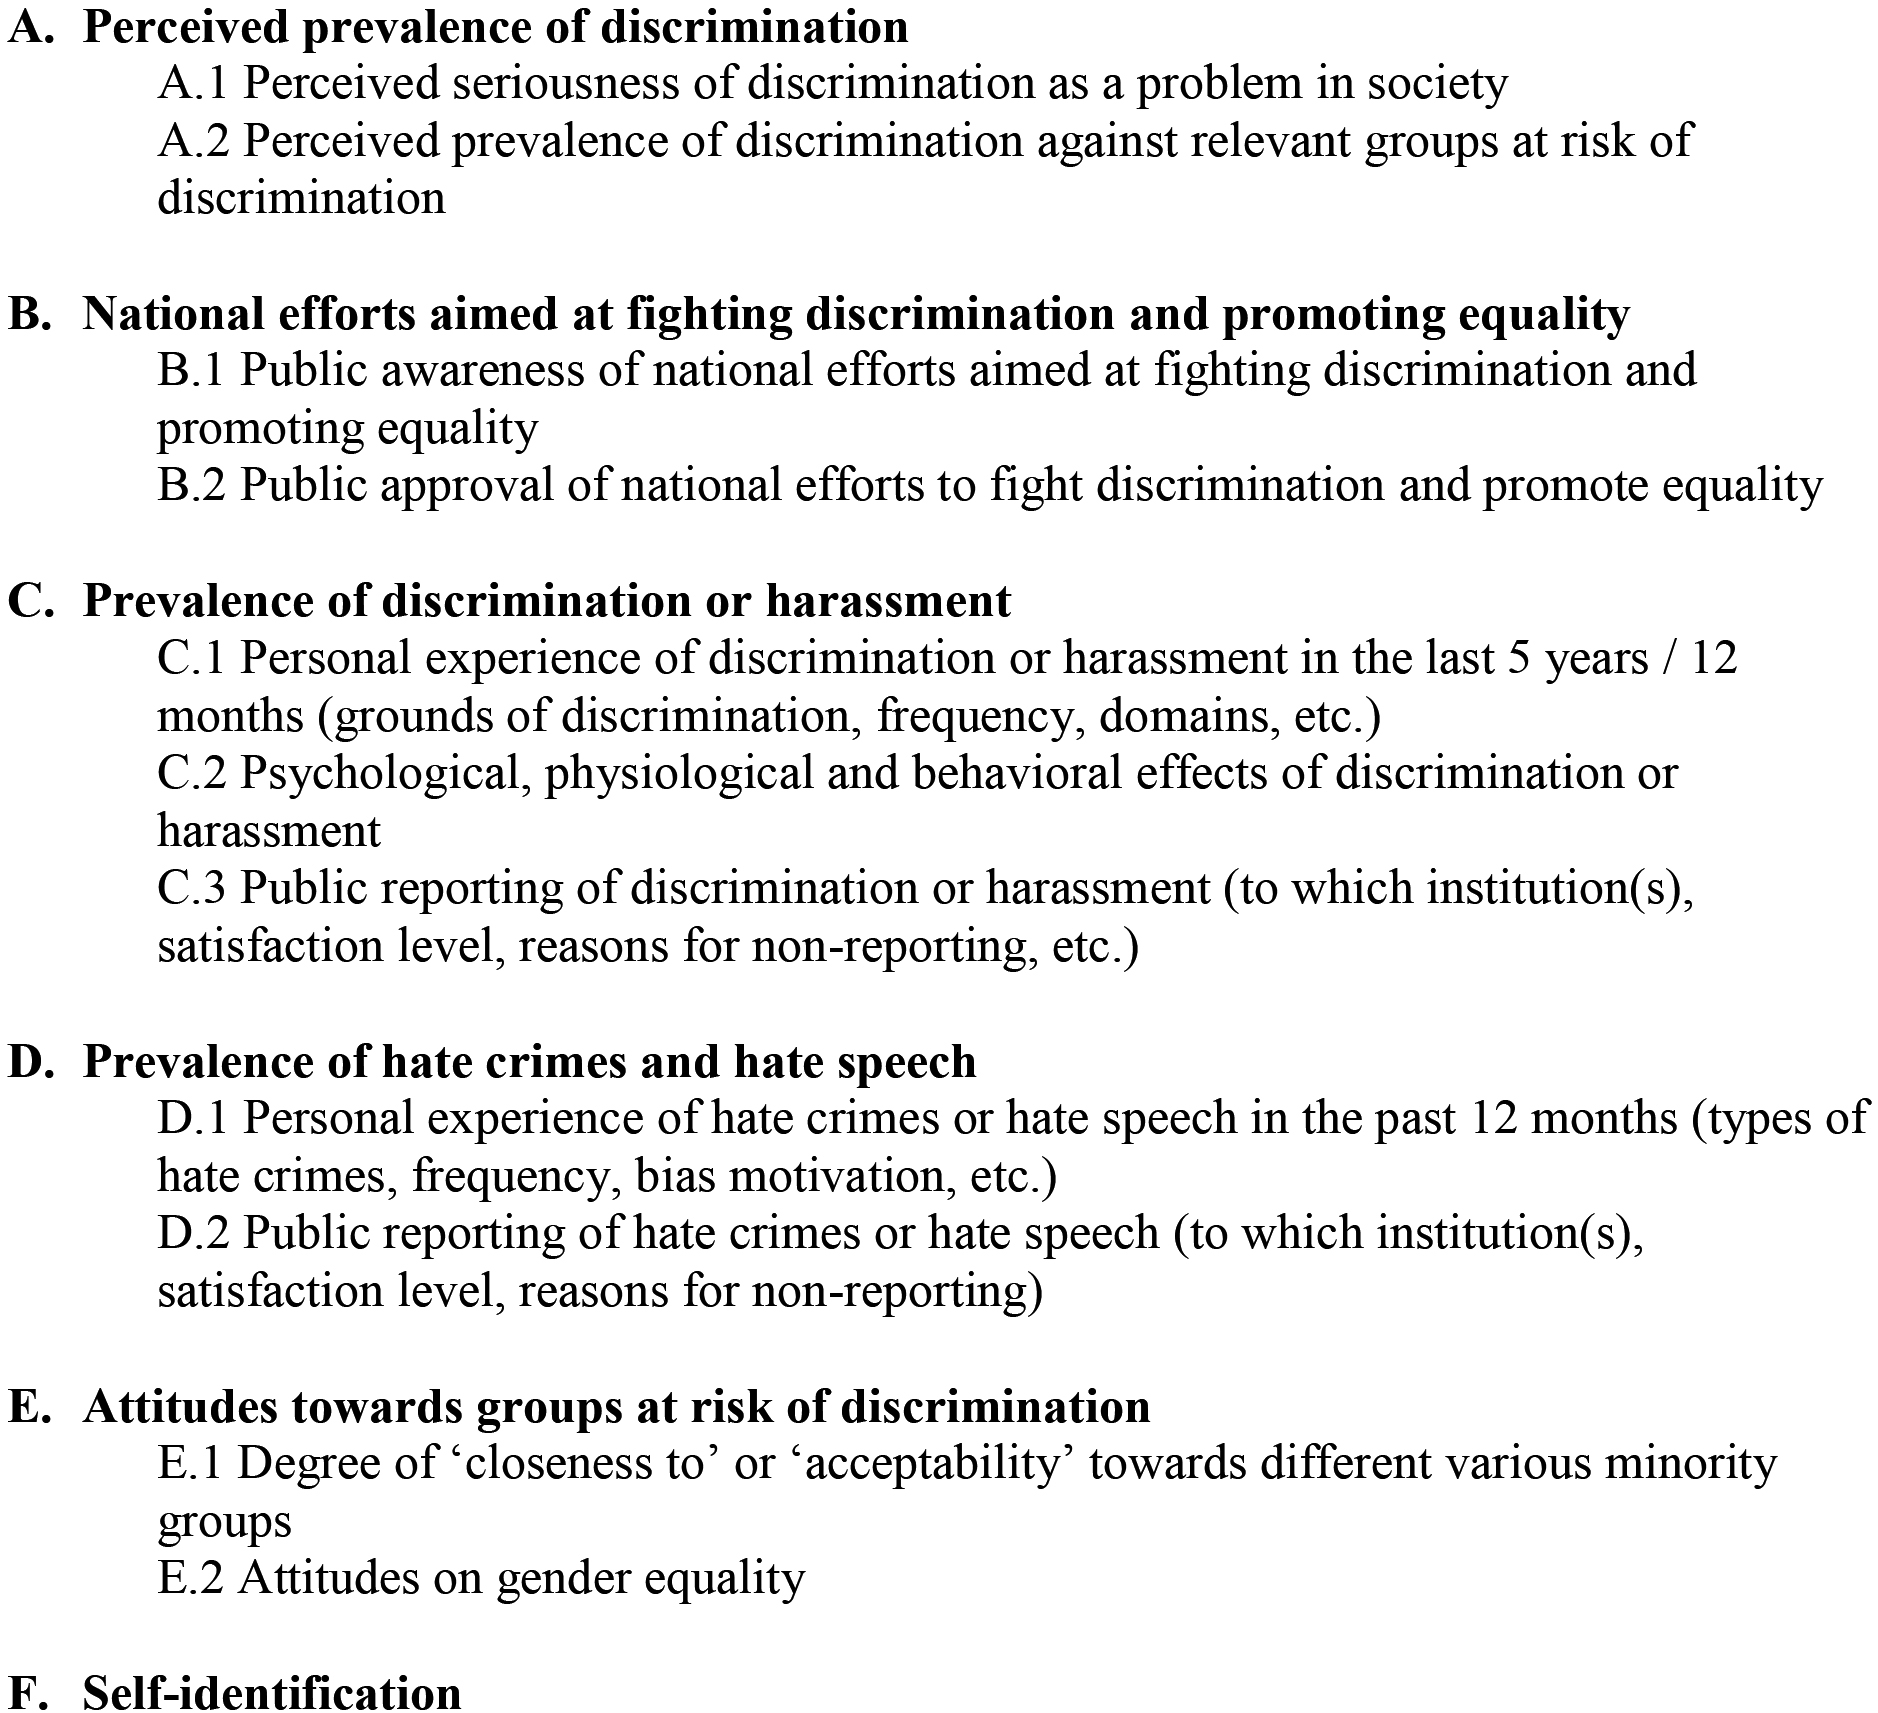 Measurement areas covered by the model questionnaire on non-discrimination and equality.